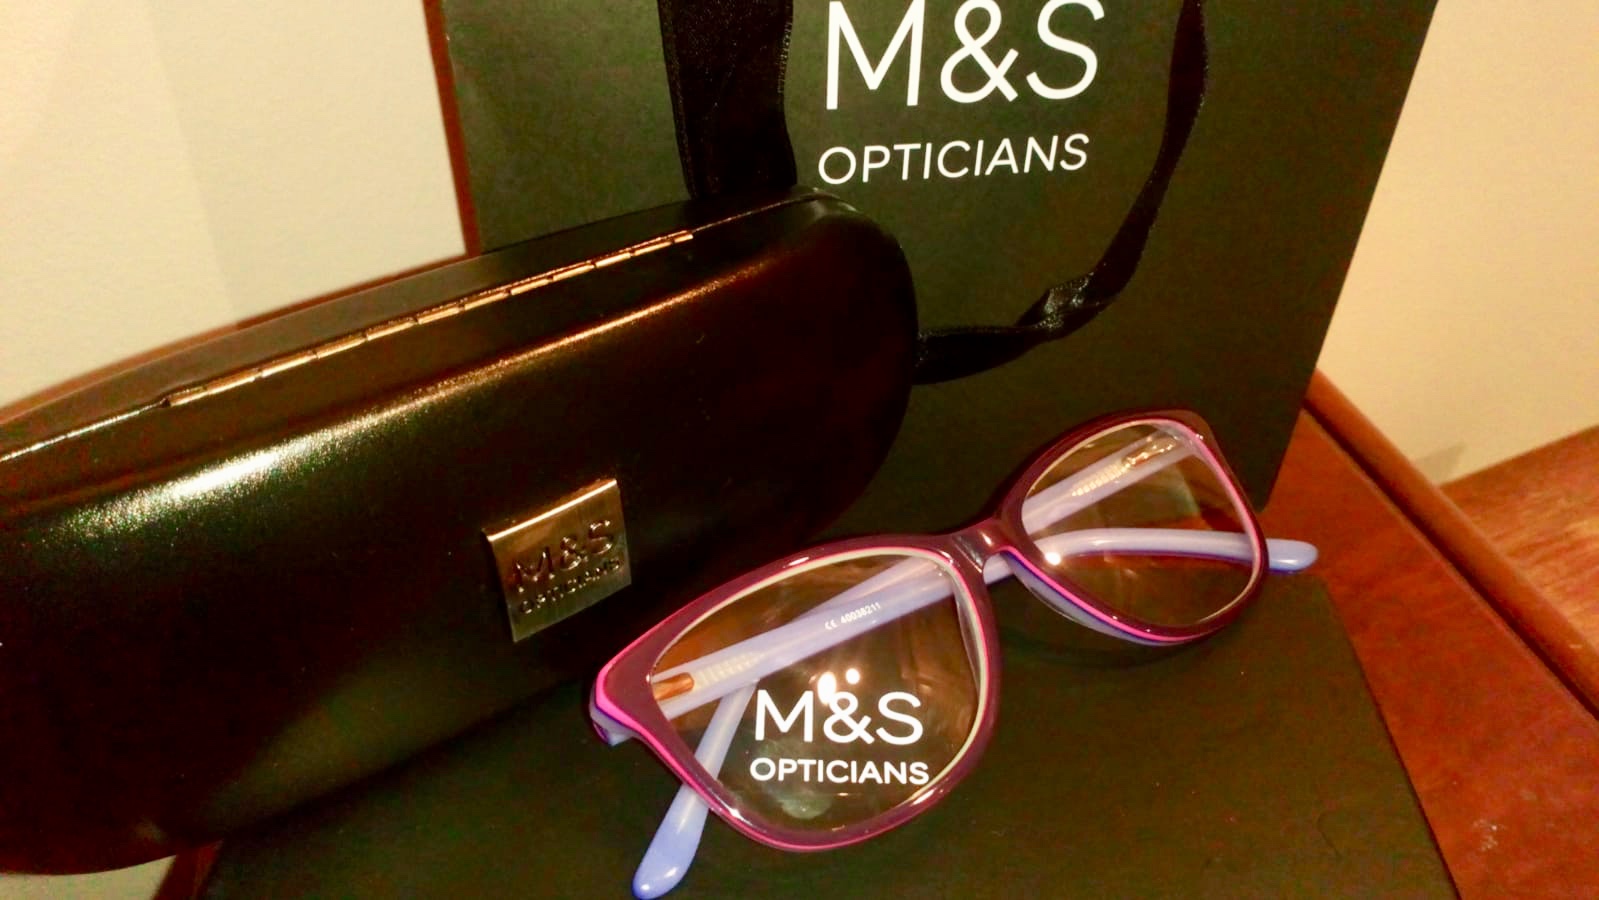 Marks and Spencer’s Opticians purple glasses next to a branded Marks and Spencer’s black glasses case and bag